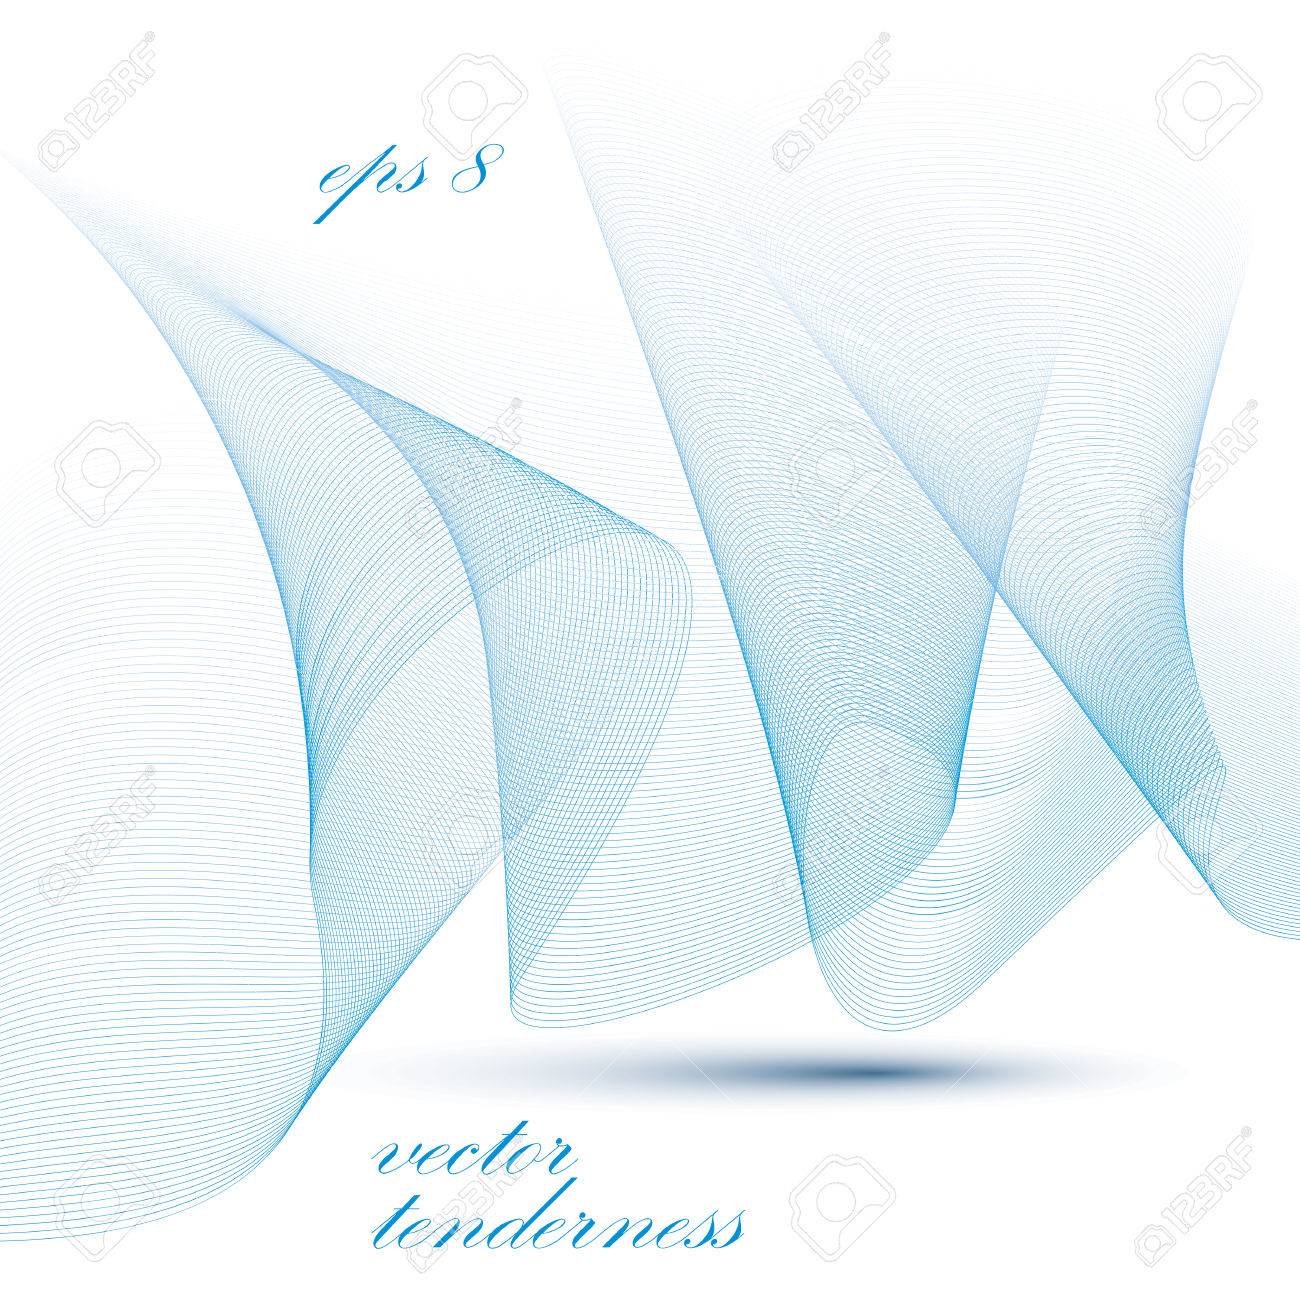 3d Vector Decorative Background With Curved Transparent Dynamic